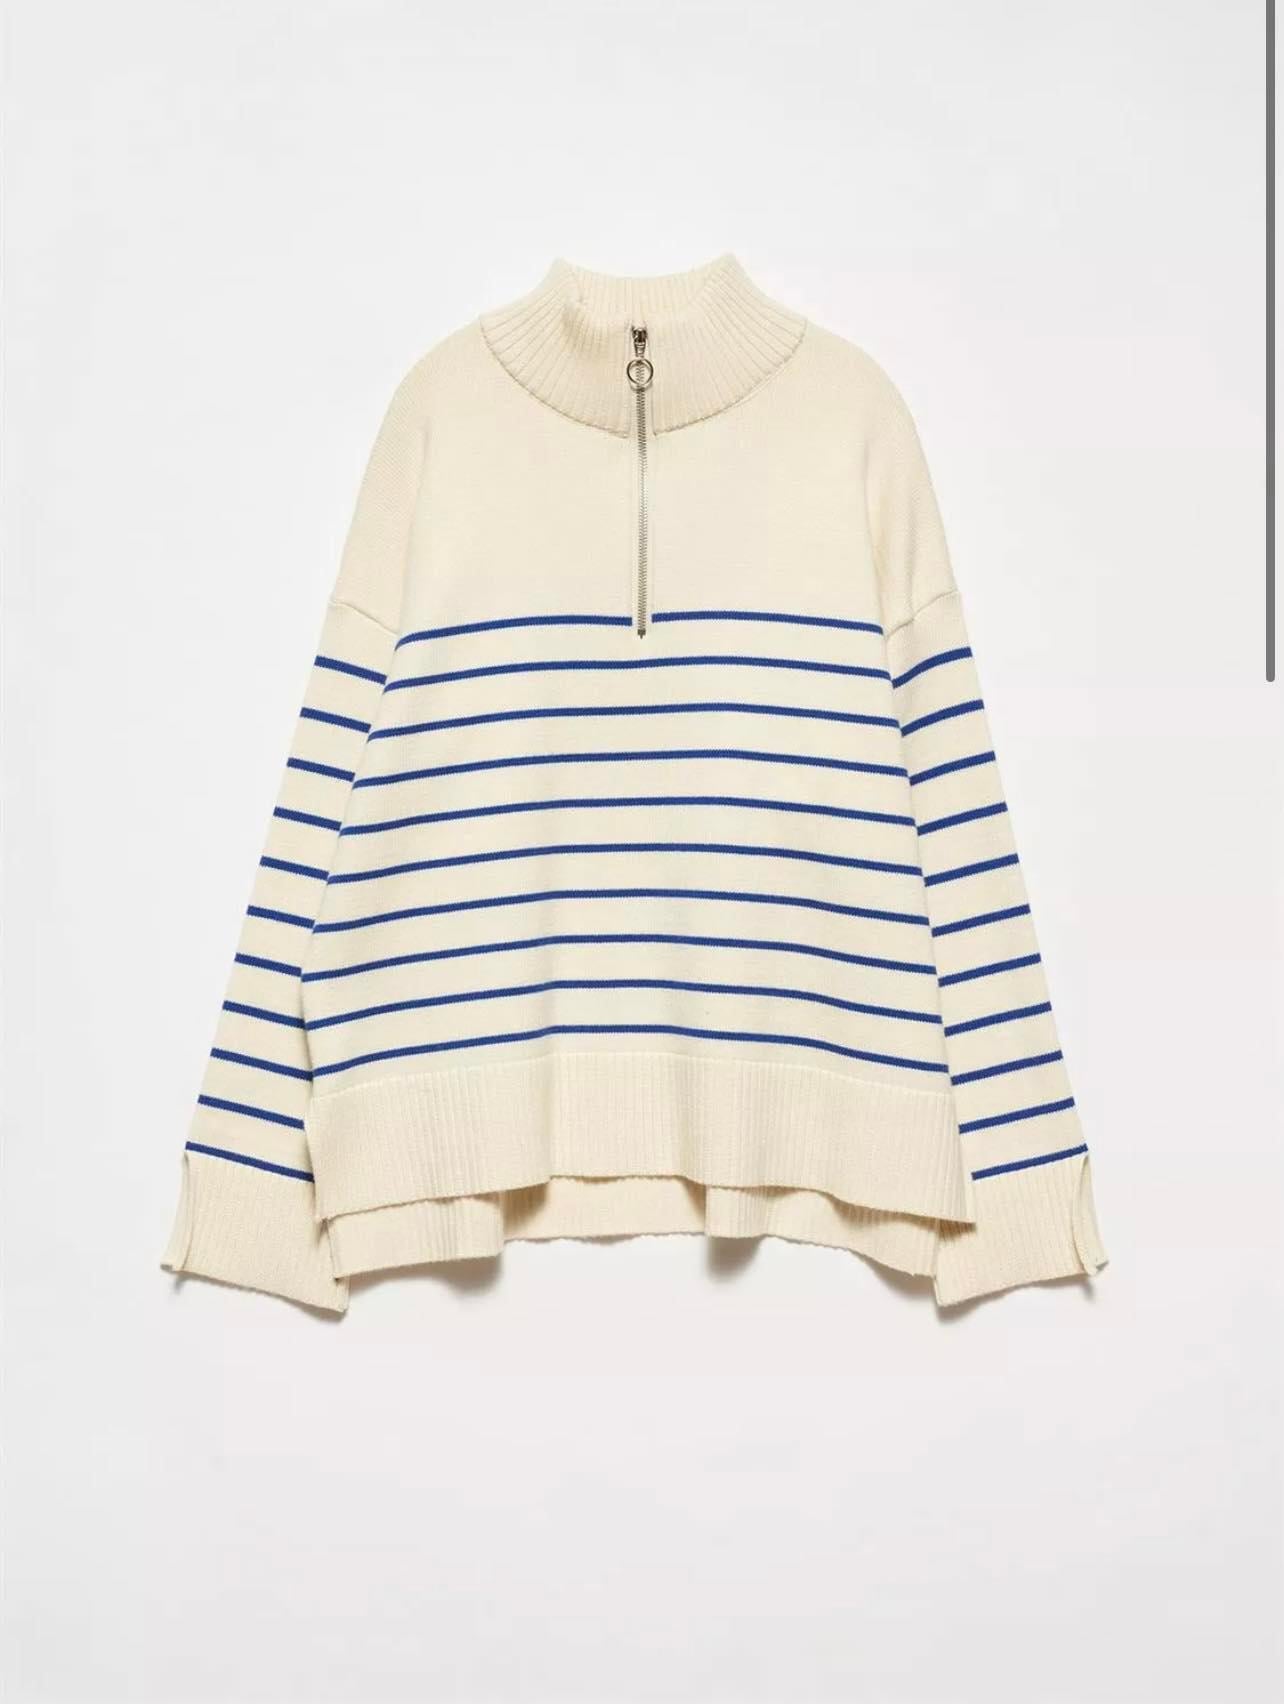 Stand-up Collar Zipper Striped Knitted Sweater